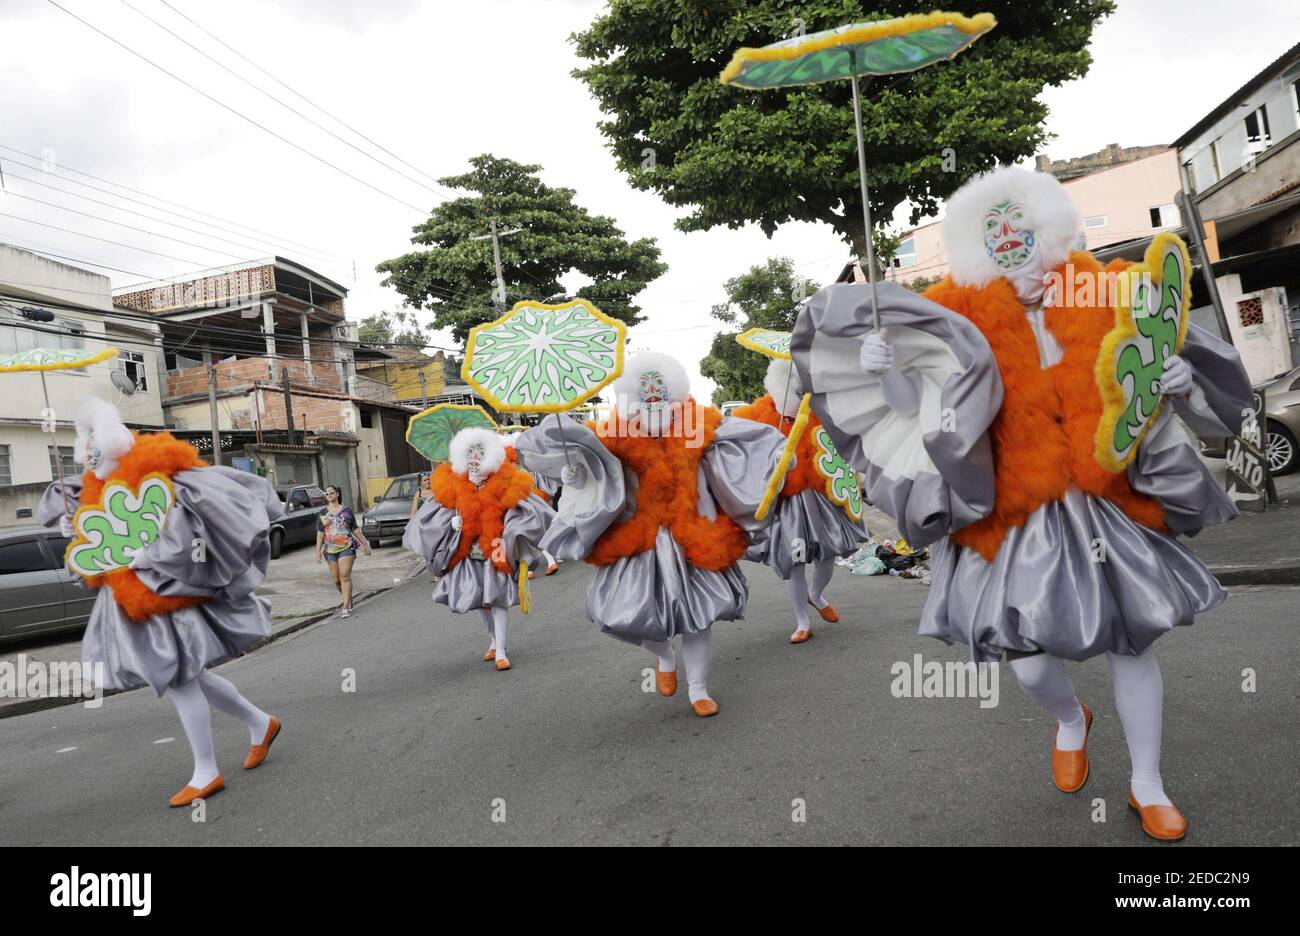 Bate-bola" (slam the ball) revelers perform during the traditional carnival  festivity in the suburb in Rio de Janeiro, Brazil February 14, 2021 despite  Carnival celebrations being cancelled due to the coronavirus disease (